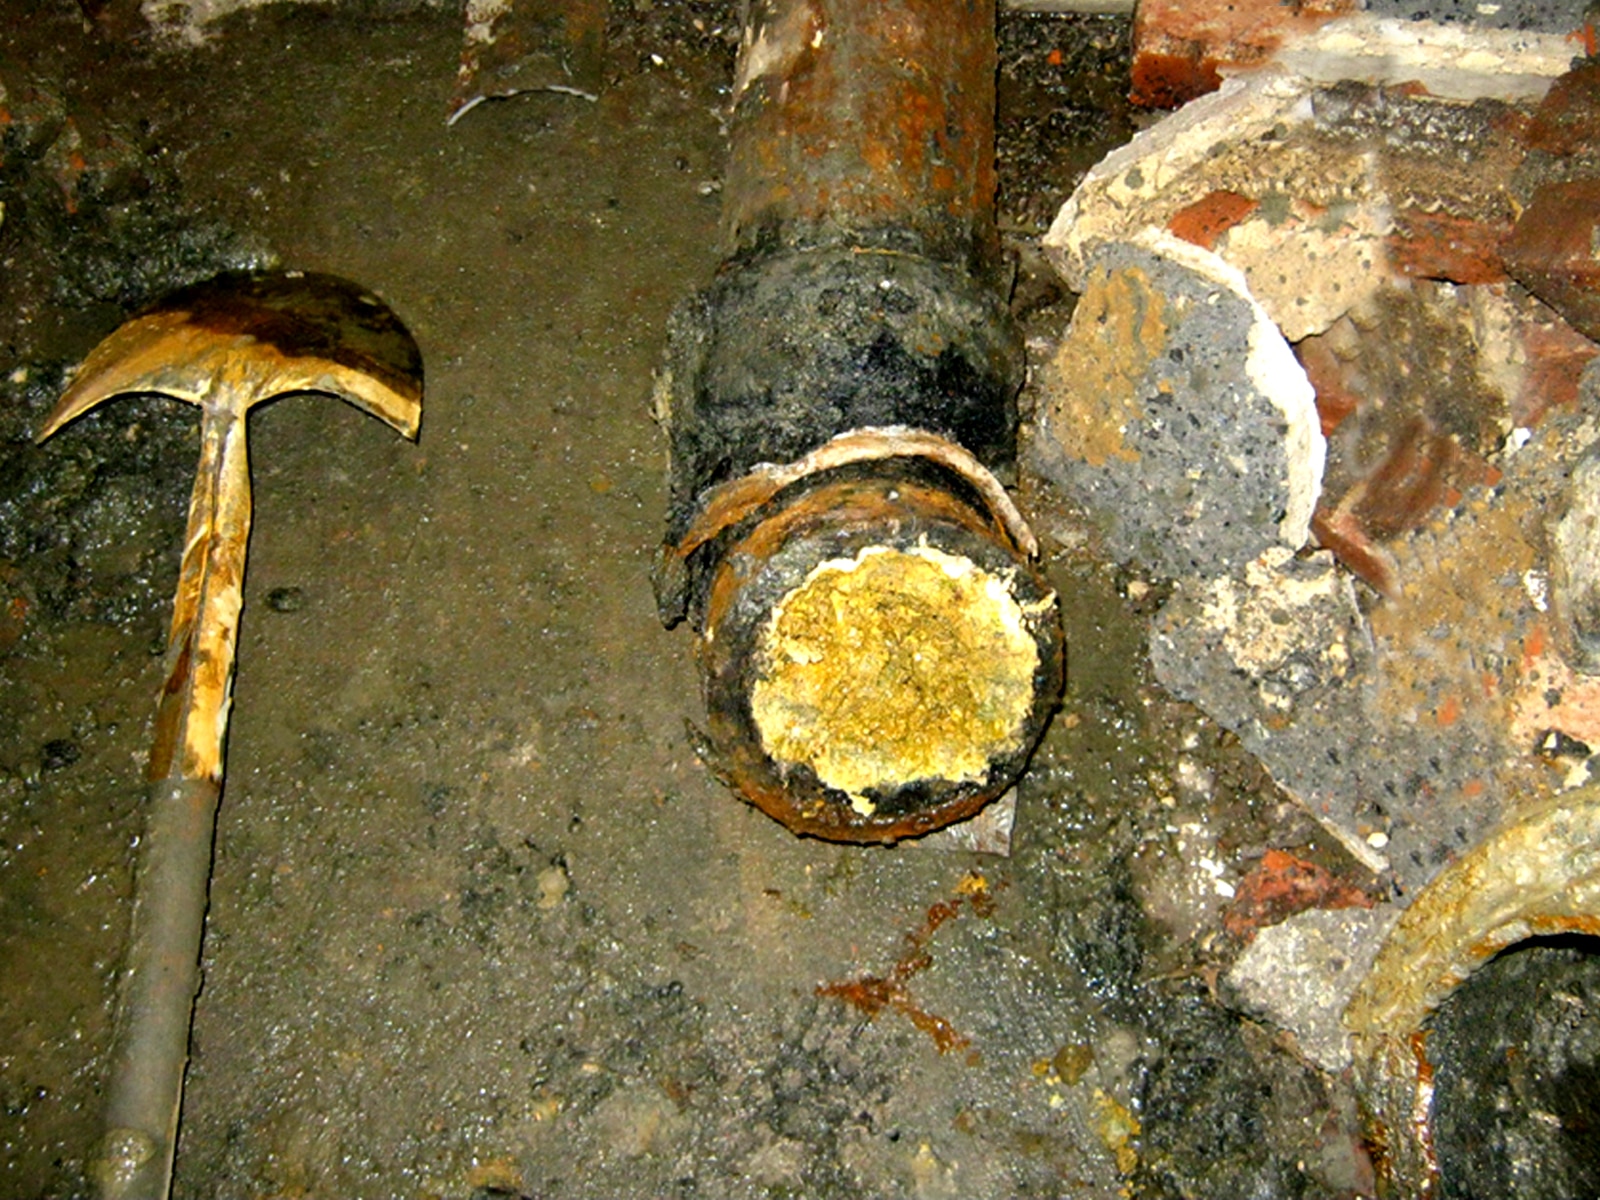 https://balkandraincleaning.com/wp-content/uploads/grease-clogged-pipes.jpg